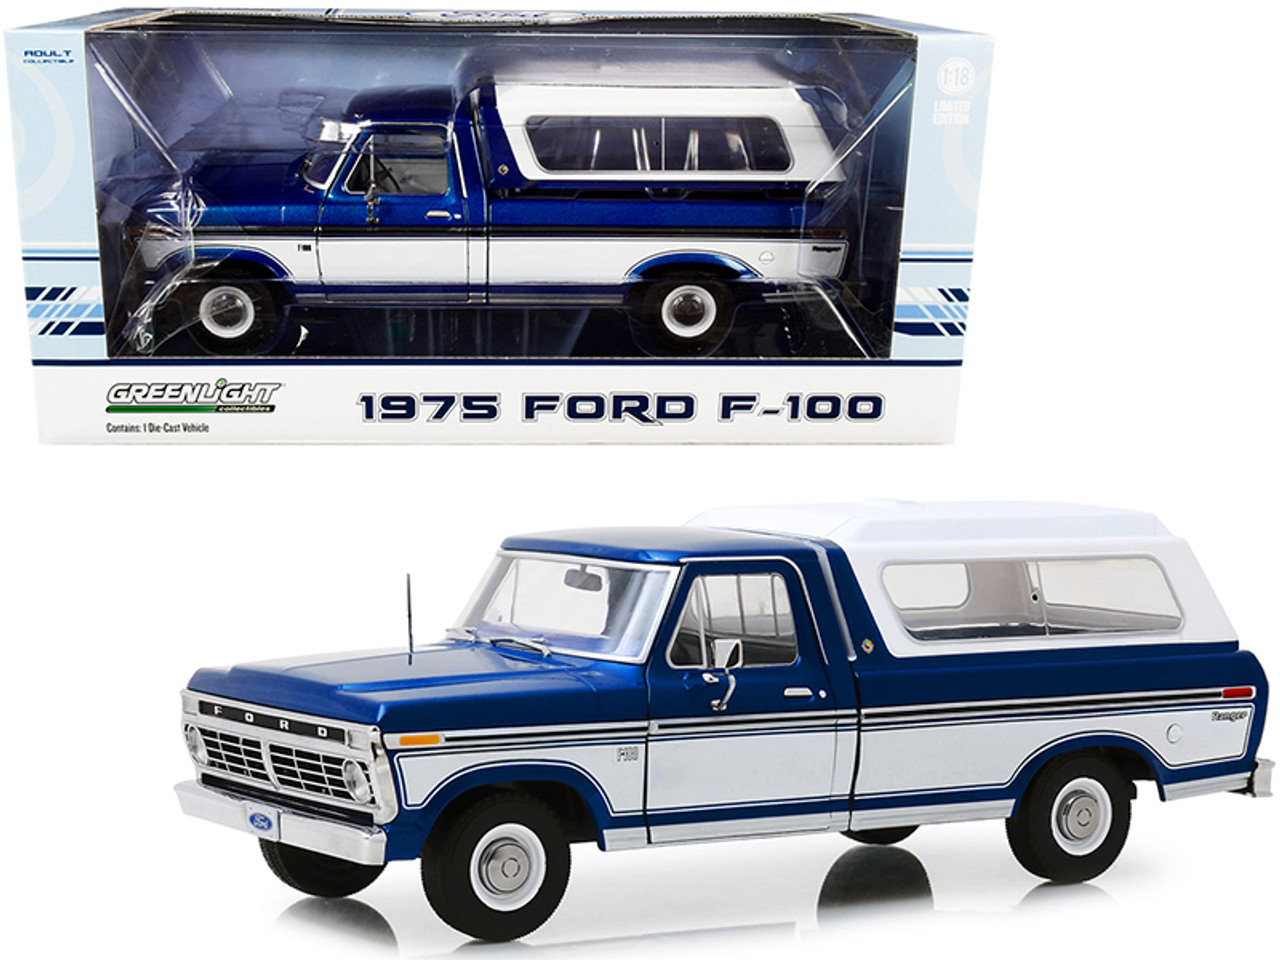 1975 Ford F-100 Ranger Pickup Truck with Deluxe Box Cover Midnight Blue Metallic and Wimbledon White 1/18 Diecast Model Car by Greenlight